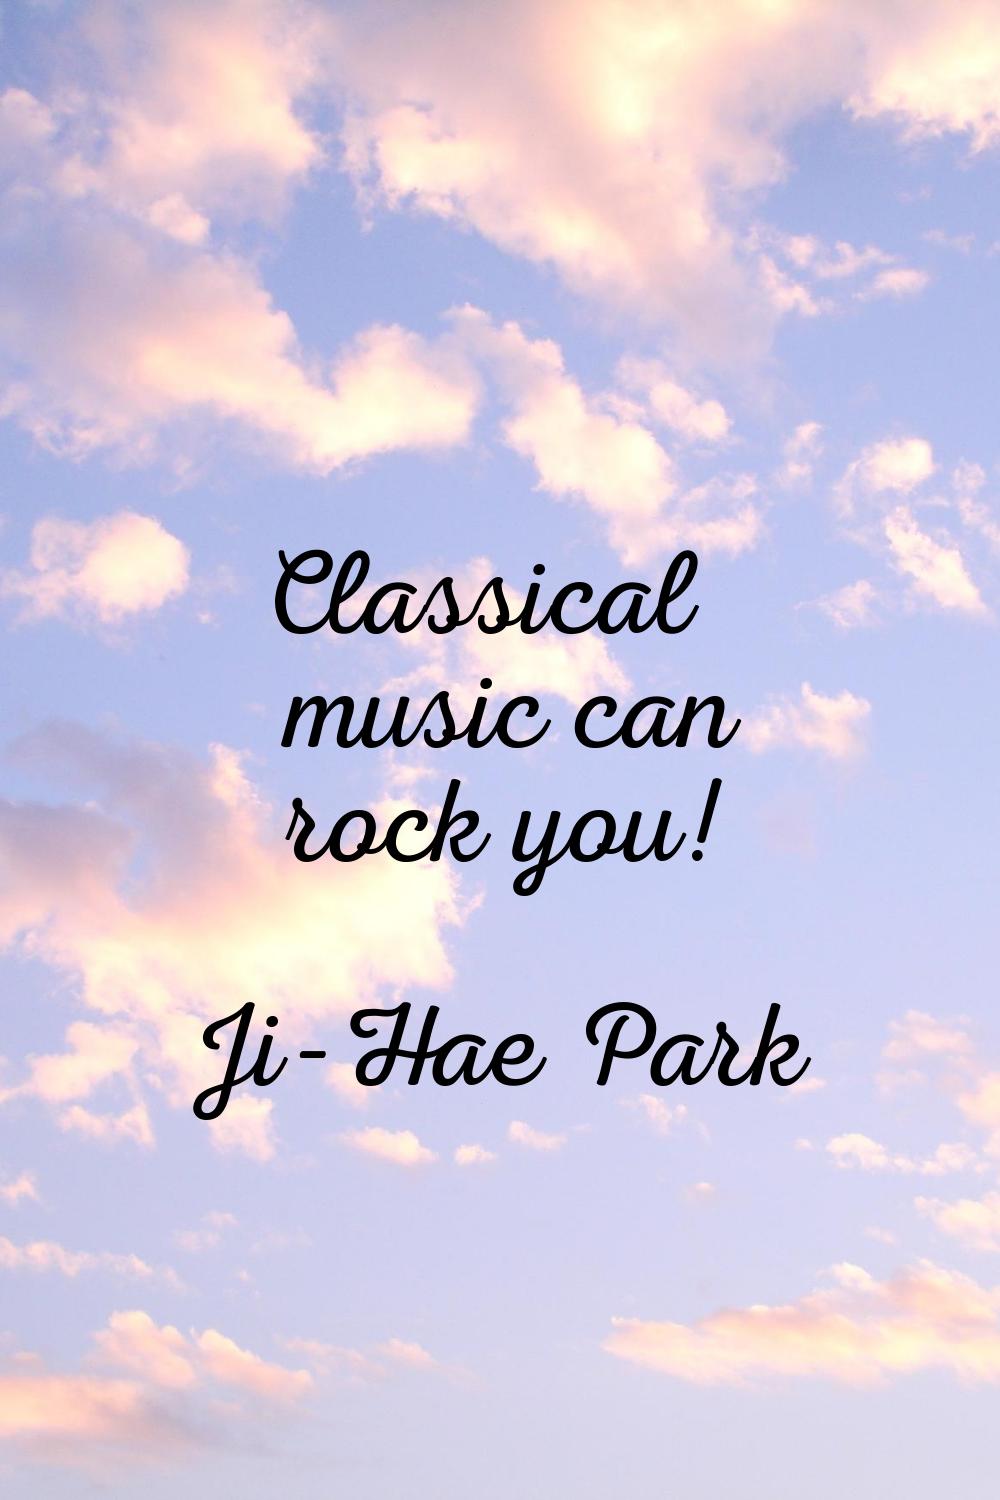 Classical music can rock you!